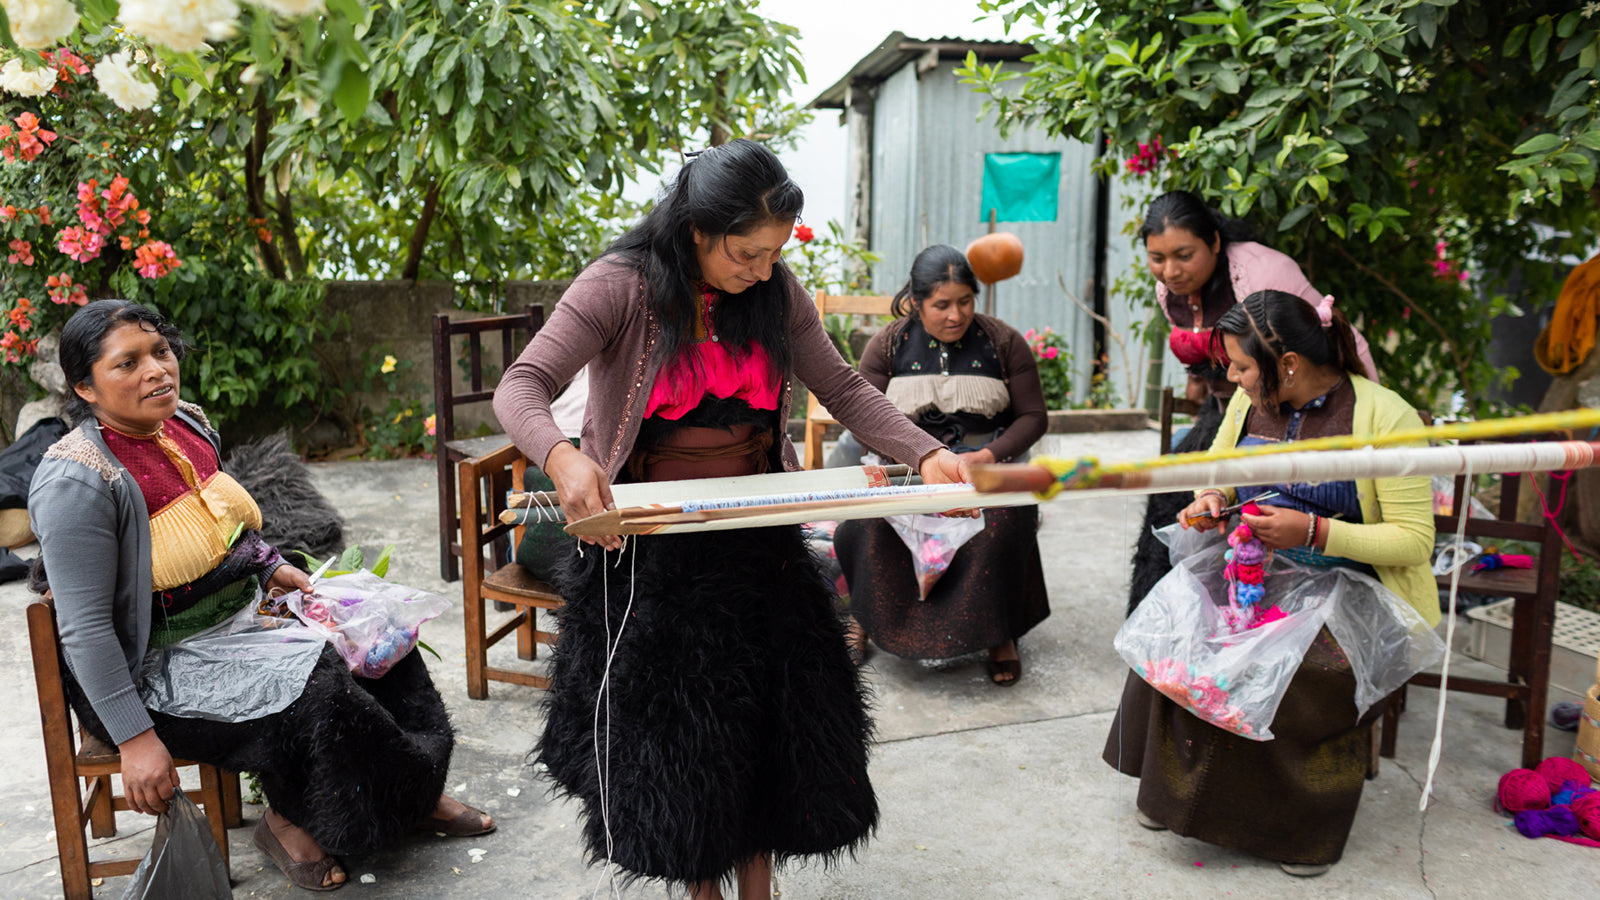 A group of women creating an artisan-made product in Mexico